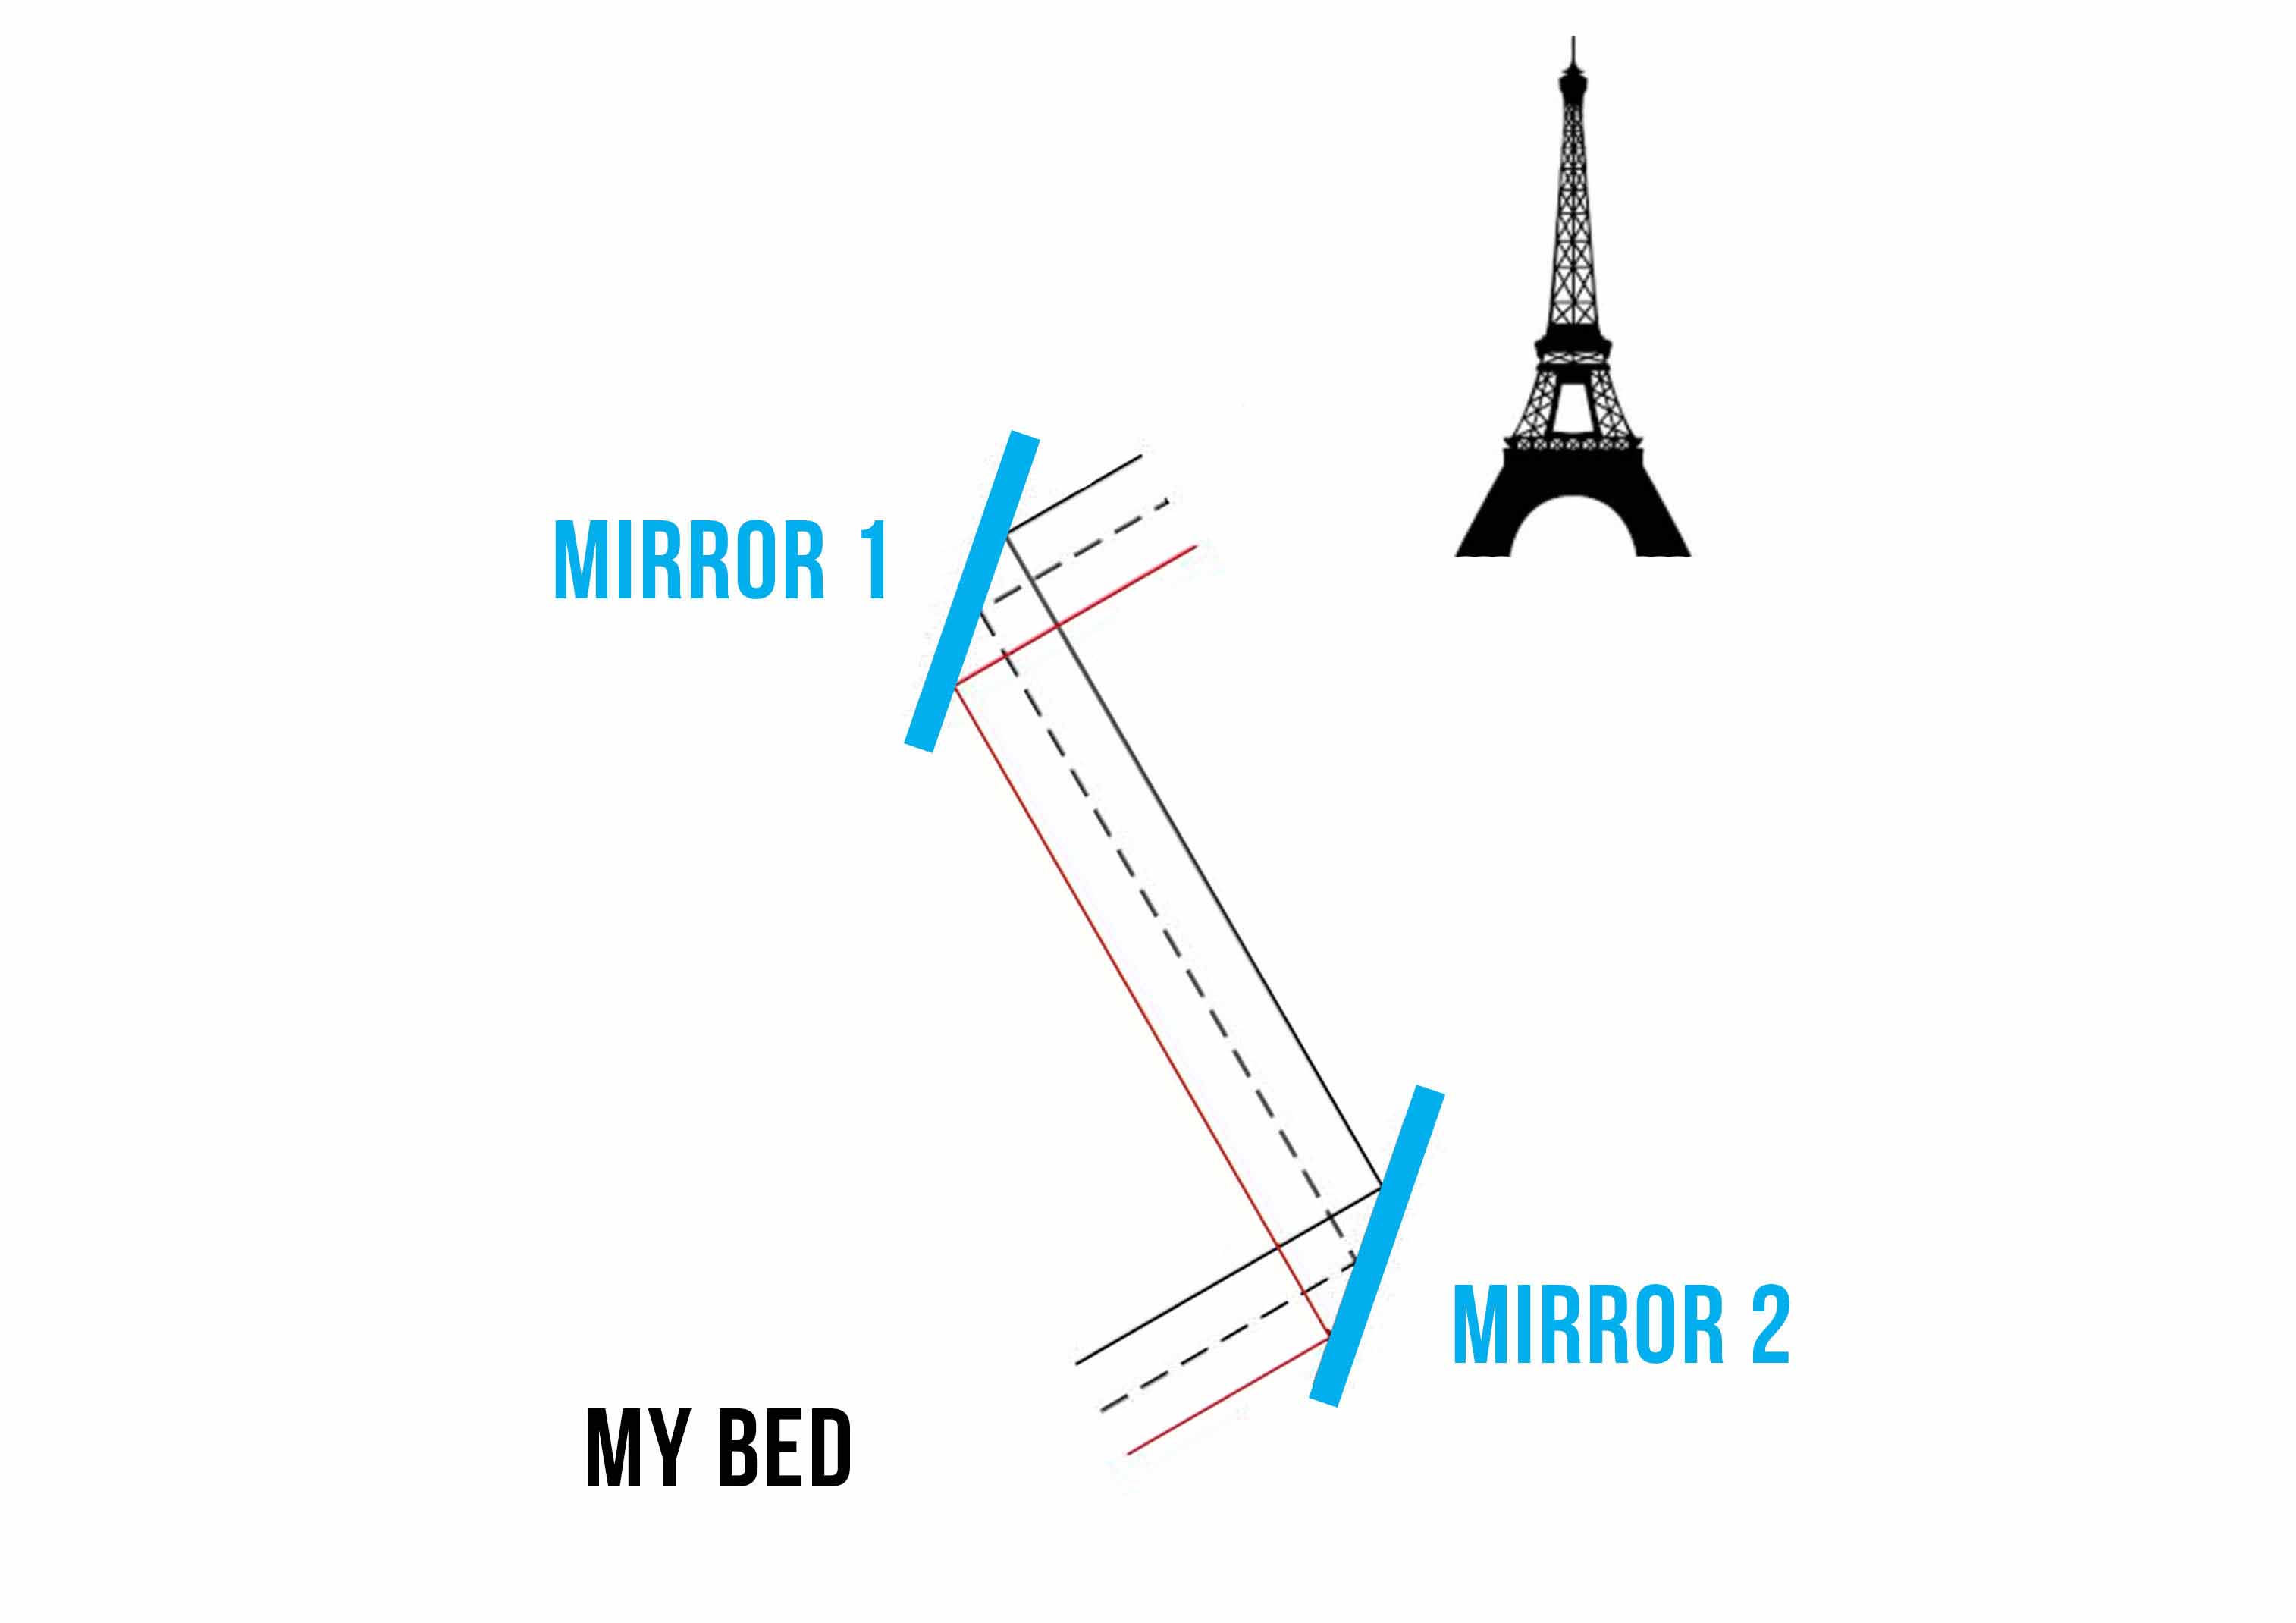 A diagram of French Redditor Lurluberlu's bed, two giant periscope mirrors, and the Eiffel Tower in Paris, France.